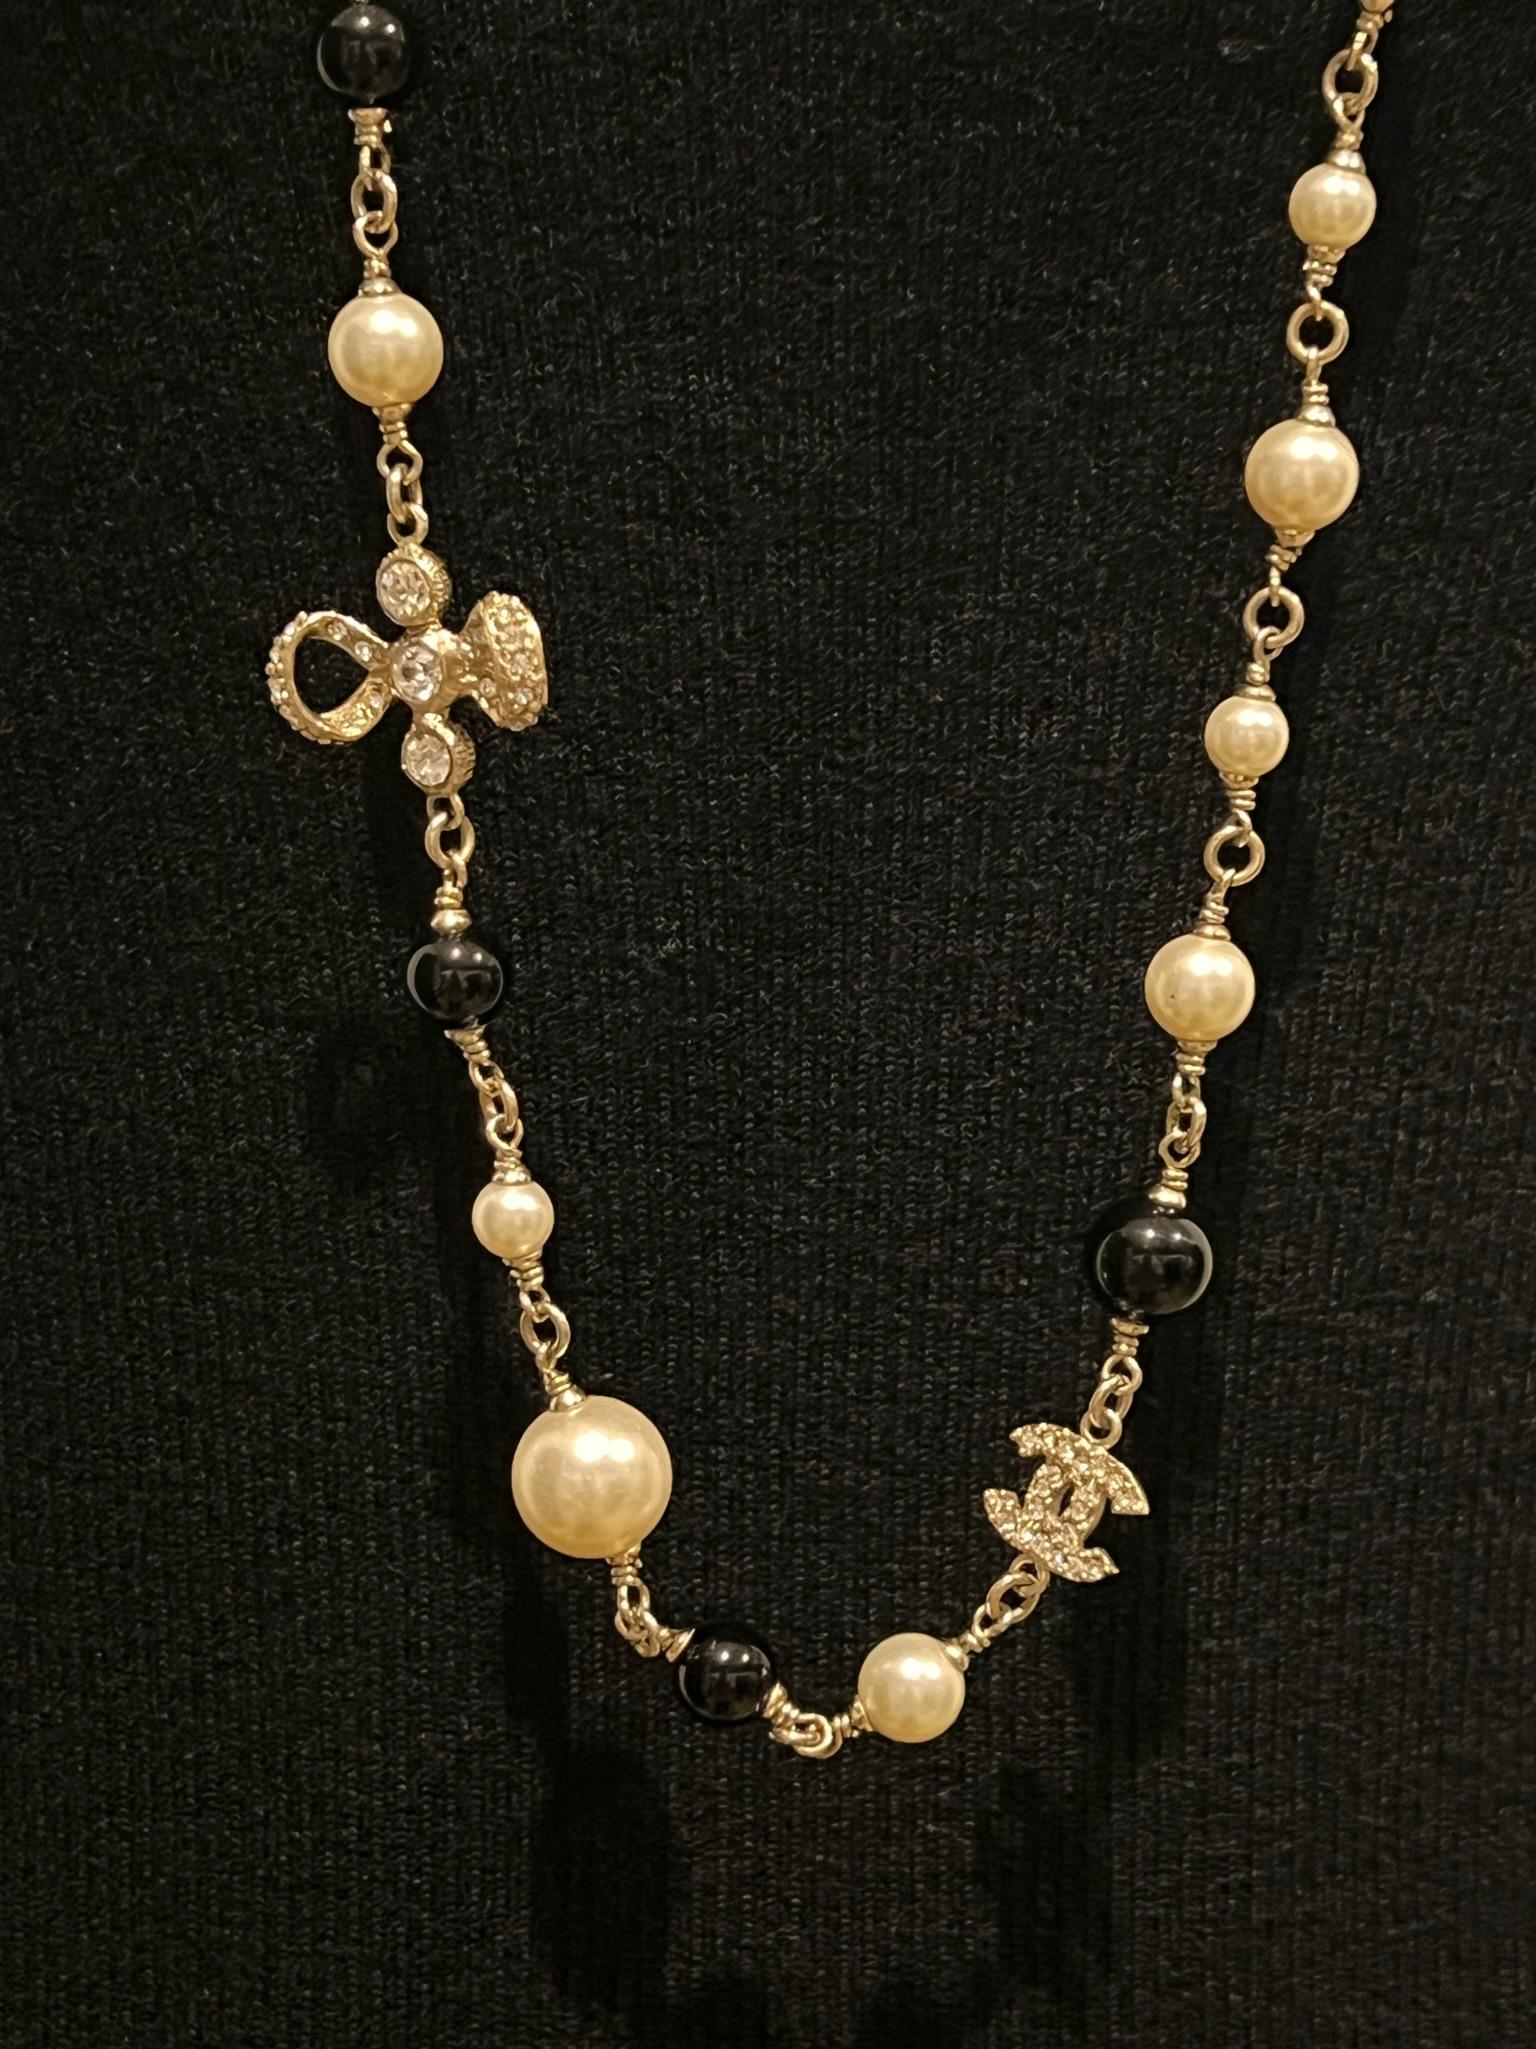 Chanel CC necklace with pearls and crystal bows. 

Faux pearls and crystals
Total length 162 cm
Portable to 1,2 or 3 turns
With box
Perfect condition